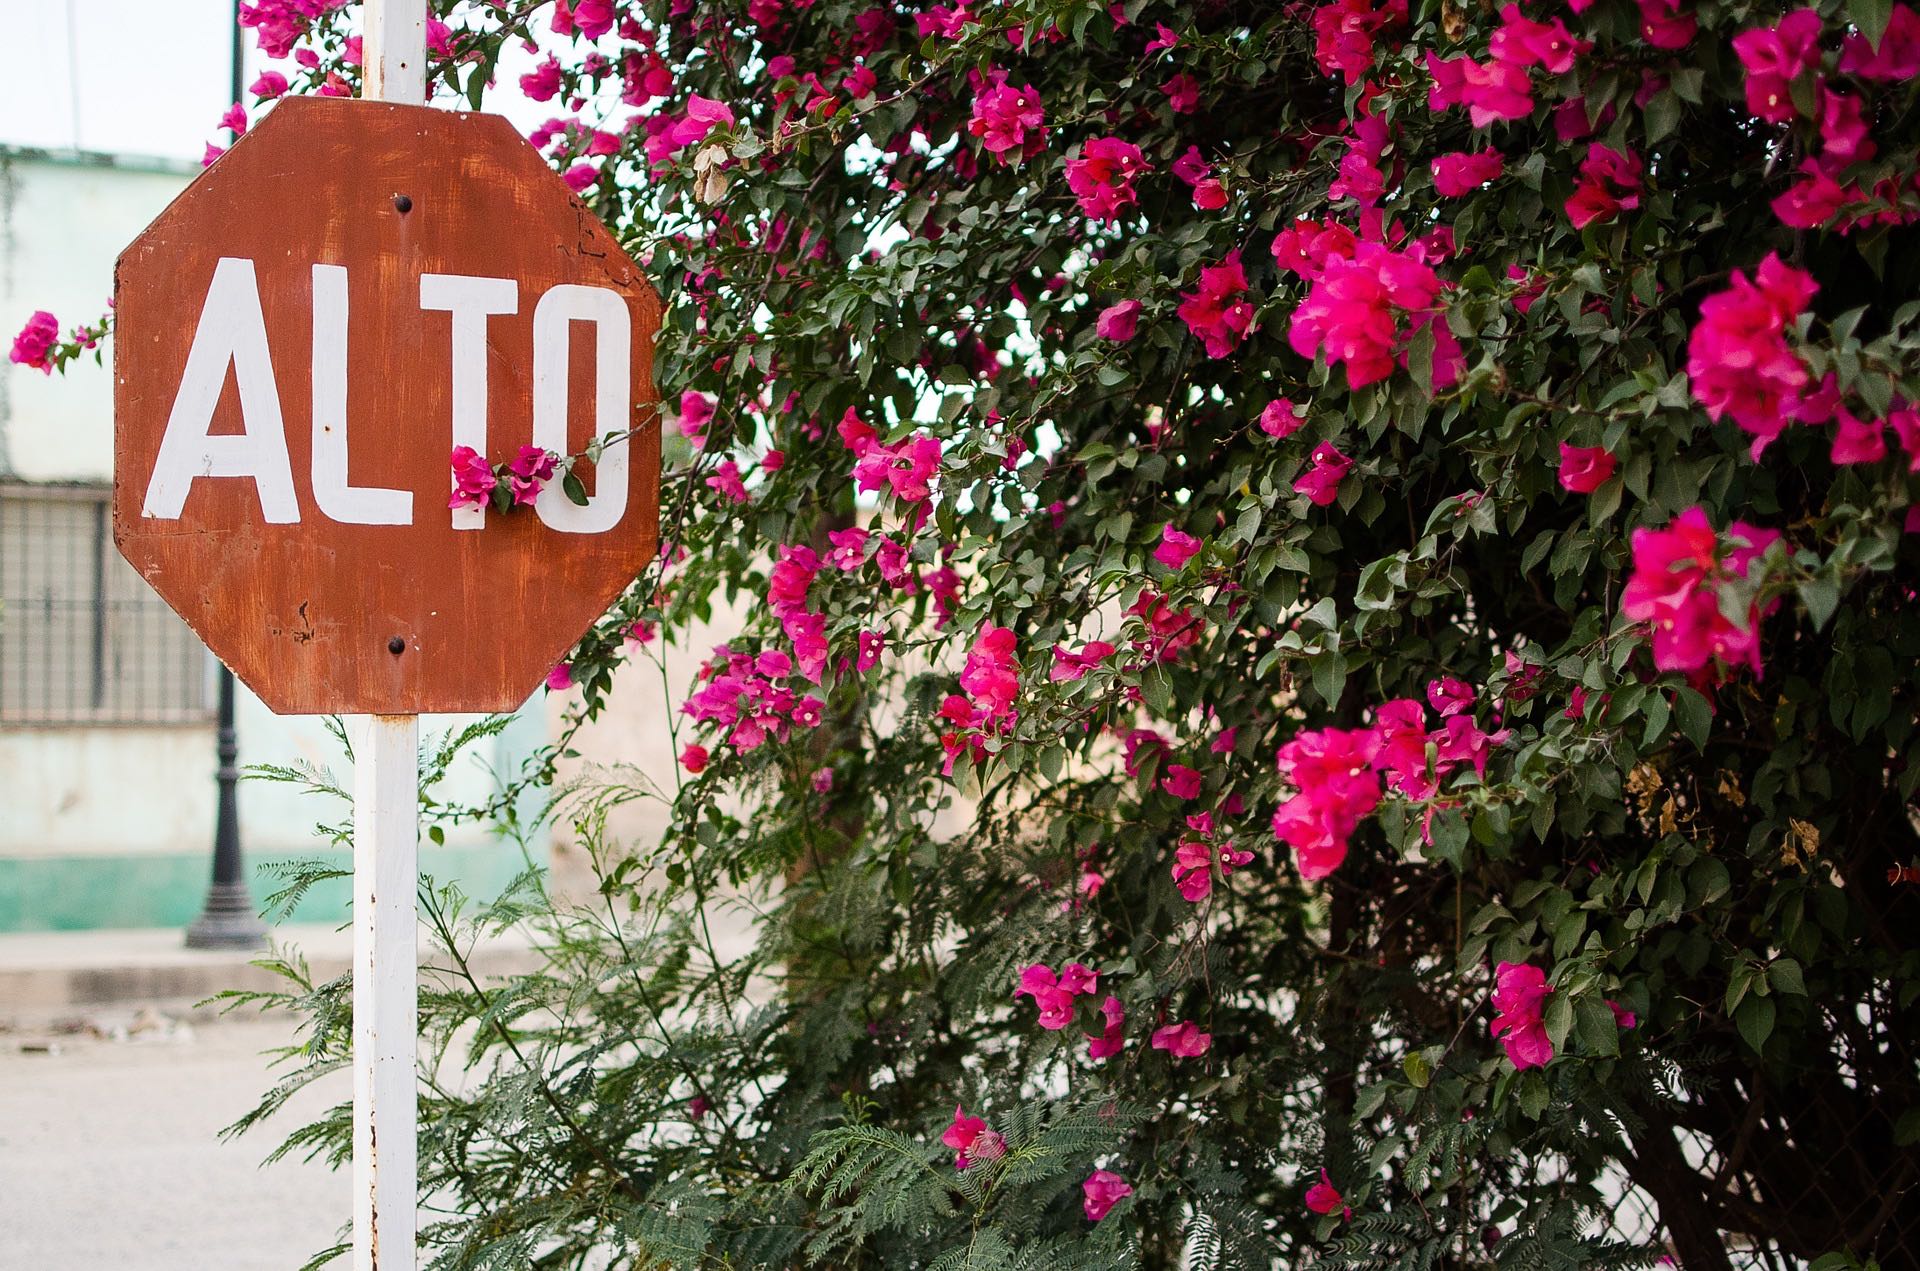 Bougainvillea bush beside a red stop sign in Spanish "Alto" it says and looks painted by hand.